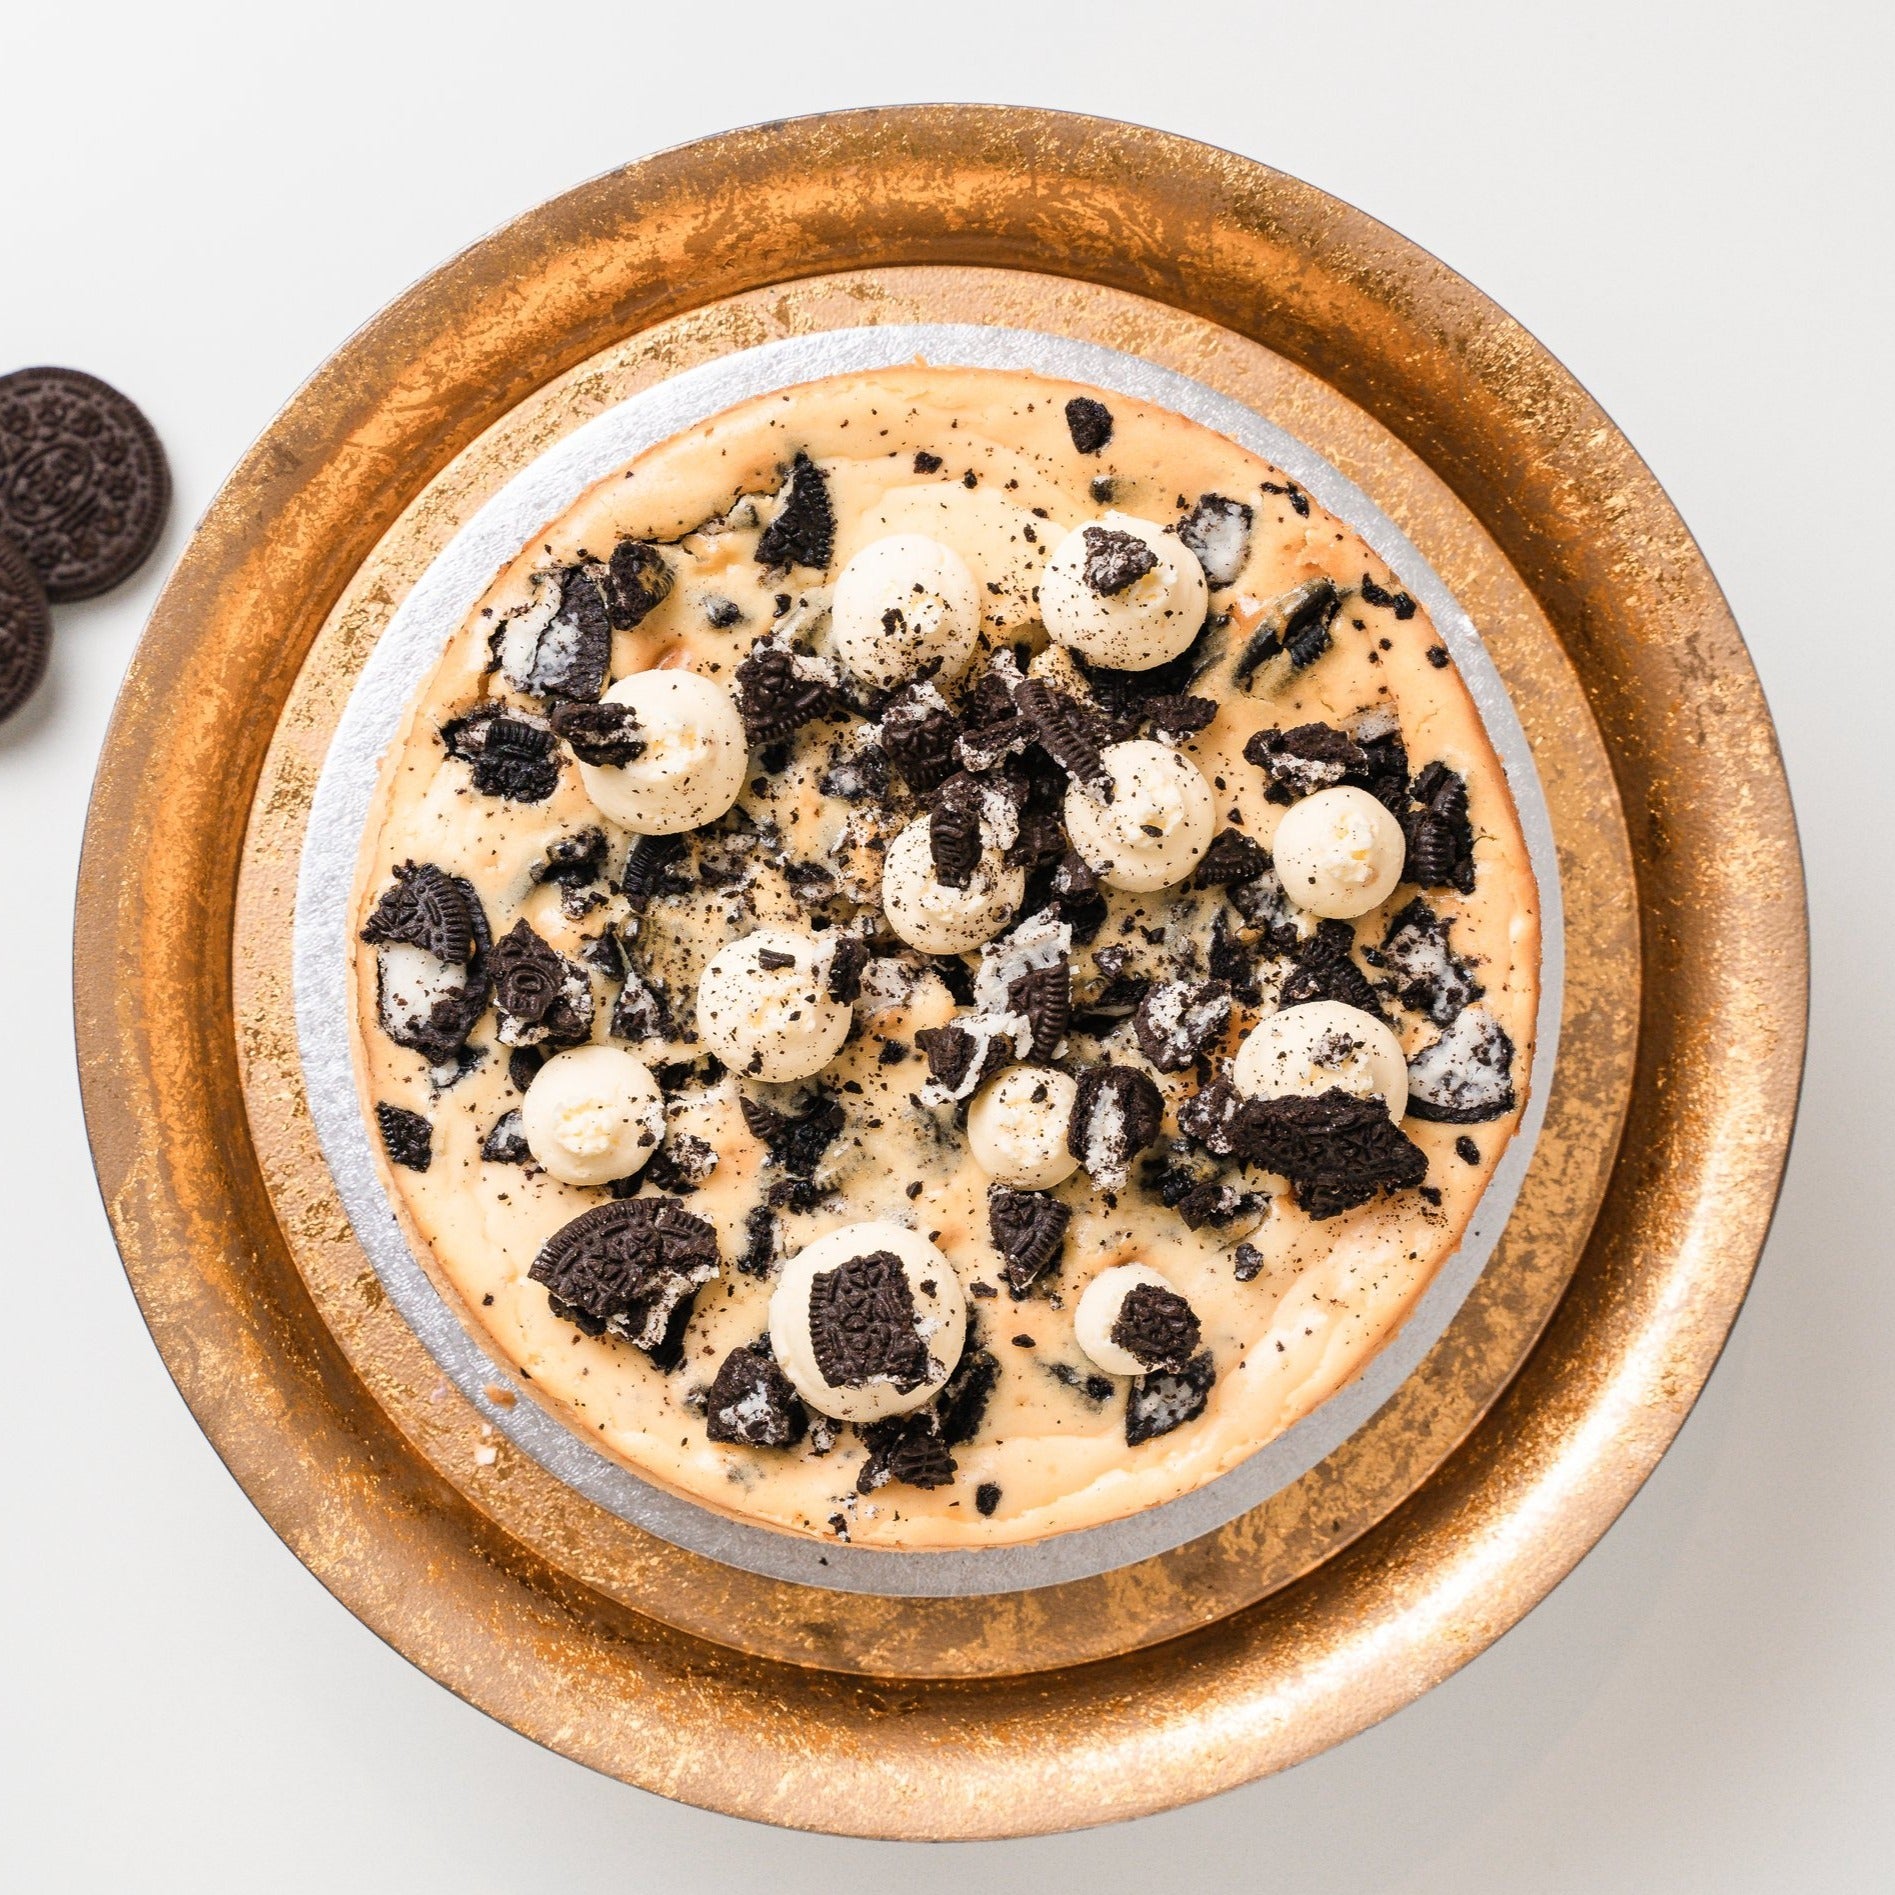 Oreo Cookie Cheesecake - Jack and Beyond